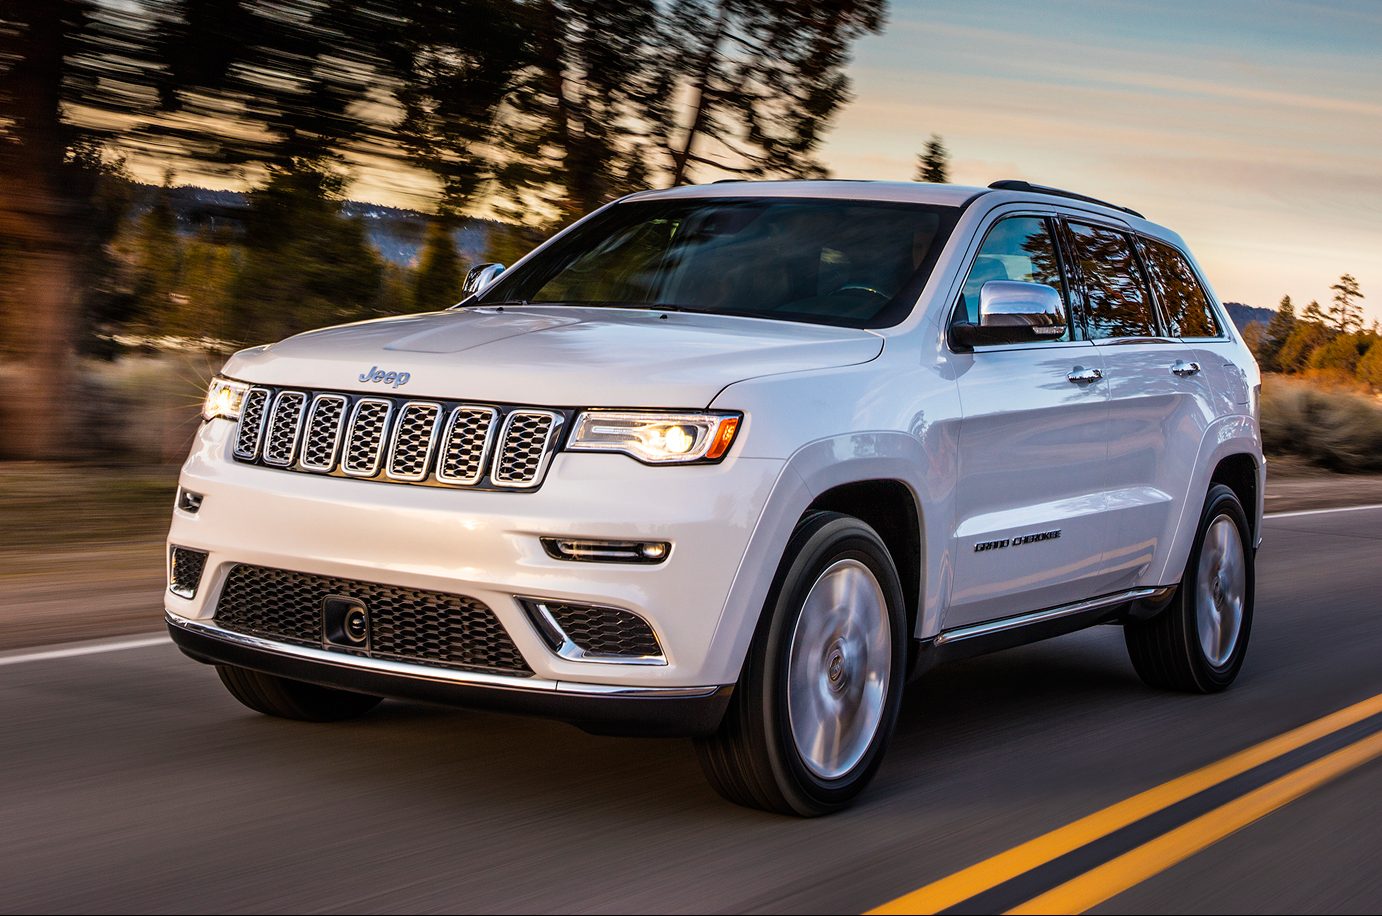 2017 Jeep Grand Cherokee Summit: 6 Things to Know